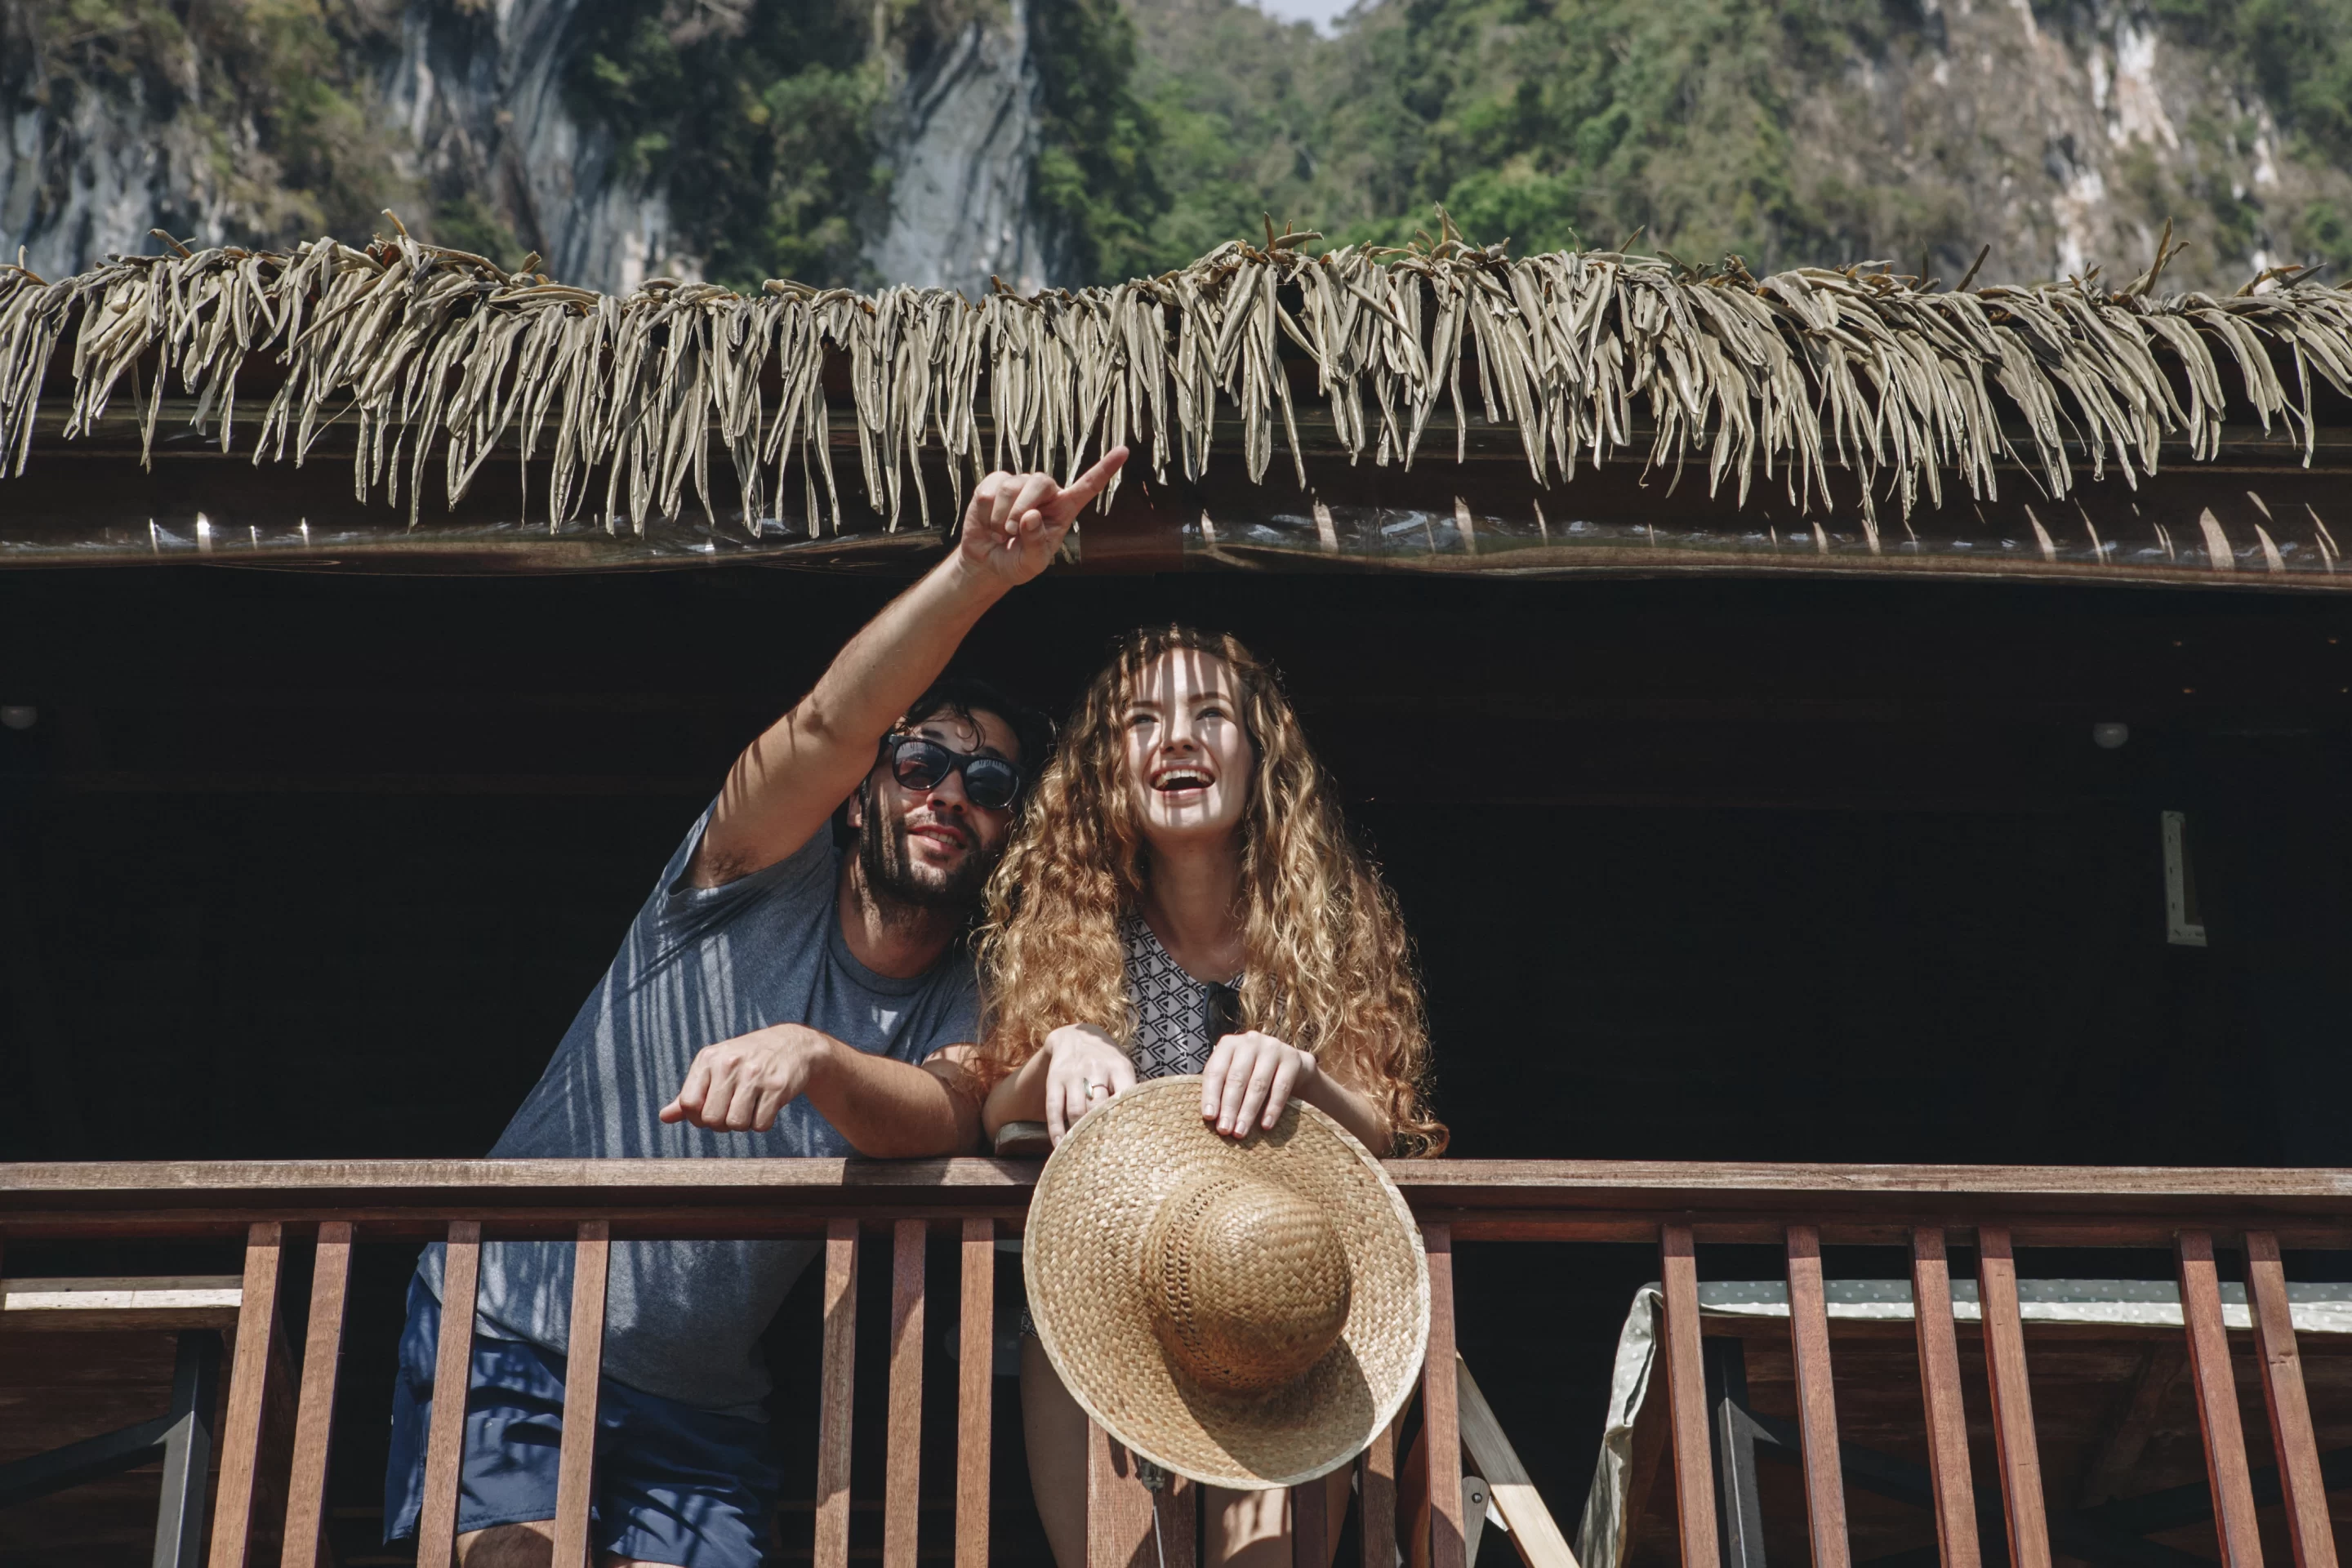 Add a unique twist to your romantic getaway with all of the activities that Manuel Antonio offers!